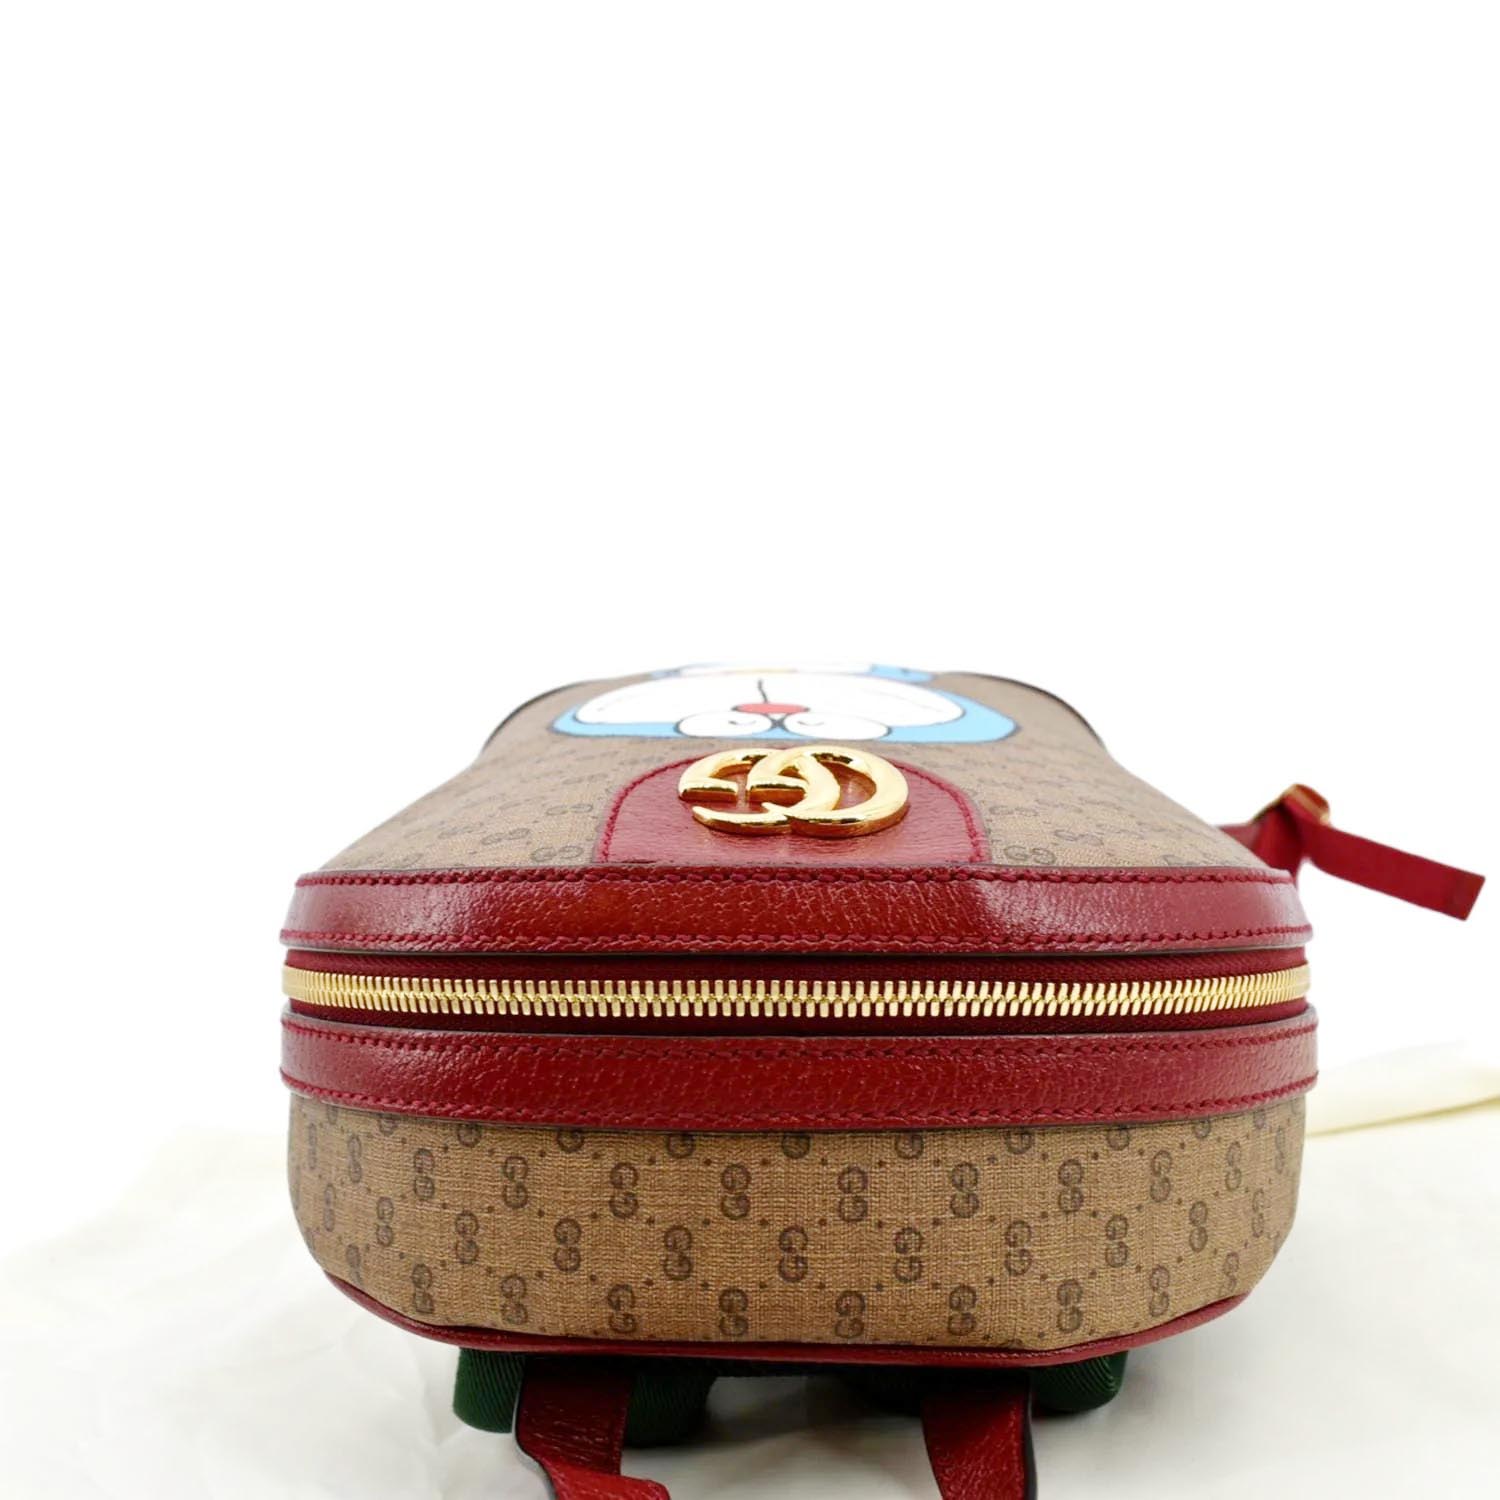 Unisex Pre-Owned Authenticated Gucci Micro GG Supreme Doraemon Backpack  Coated Canvas Fabric Brown 